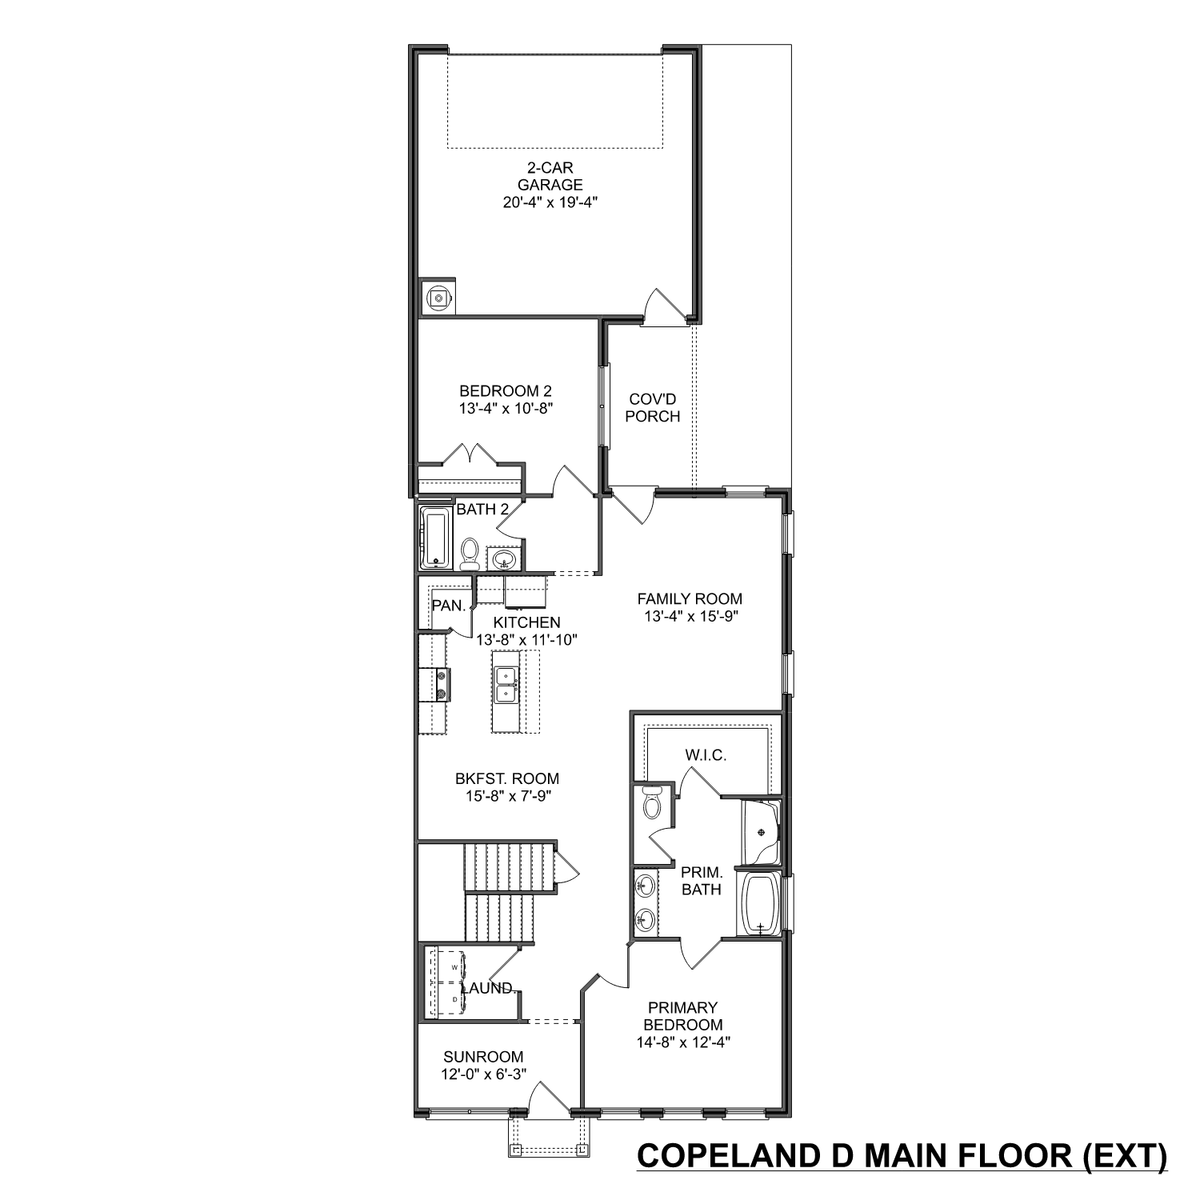 1 - The Copeland D floor plan layout for 110 Atkinson Alley in Davidson Homes' Barnett's Crossing community.